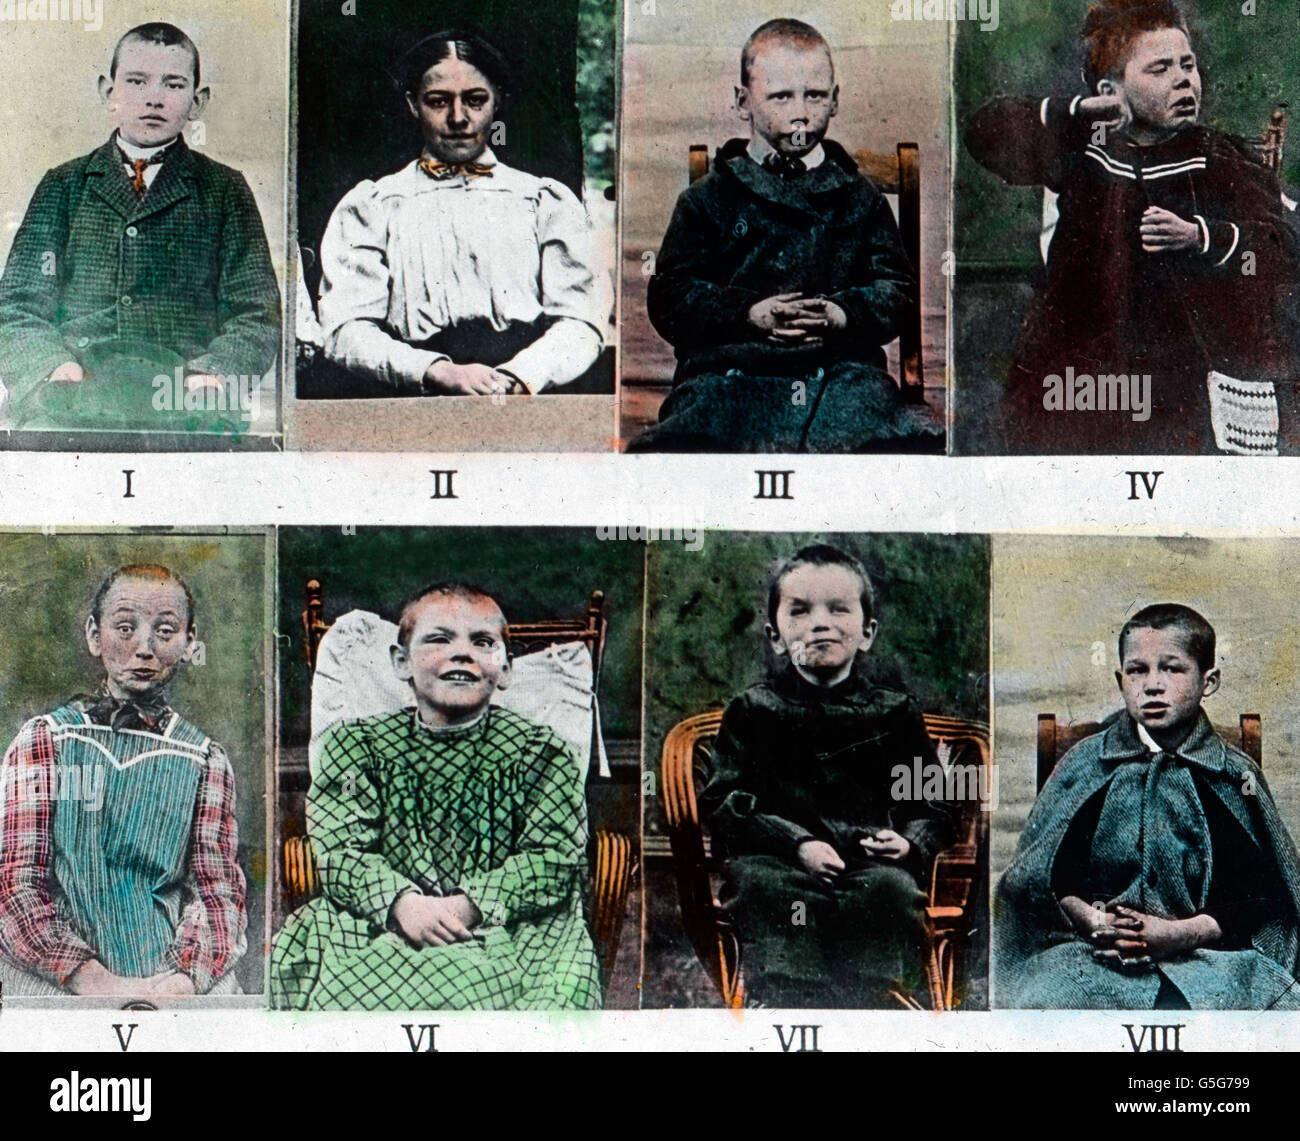 Trinkerkinder. Mentally disabled children as a result of alcoholism. children, handicapped, handicap, retarded, portraits, alcohol, drug, history, historical, 1910s, 1920s, 20th century, archive, Carl Simon, hand coloured glass slide Stock Photo